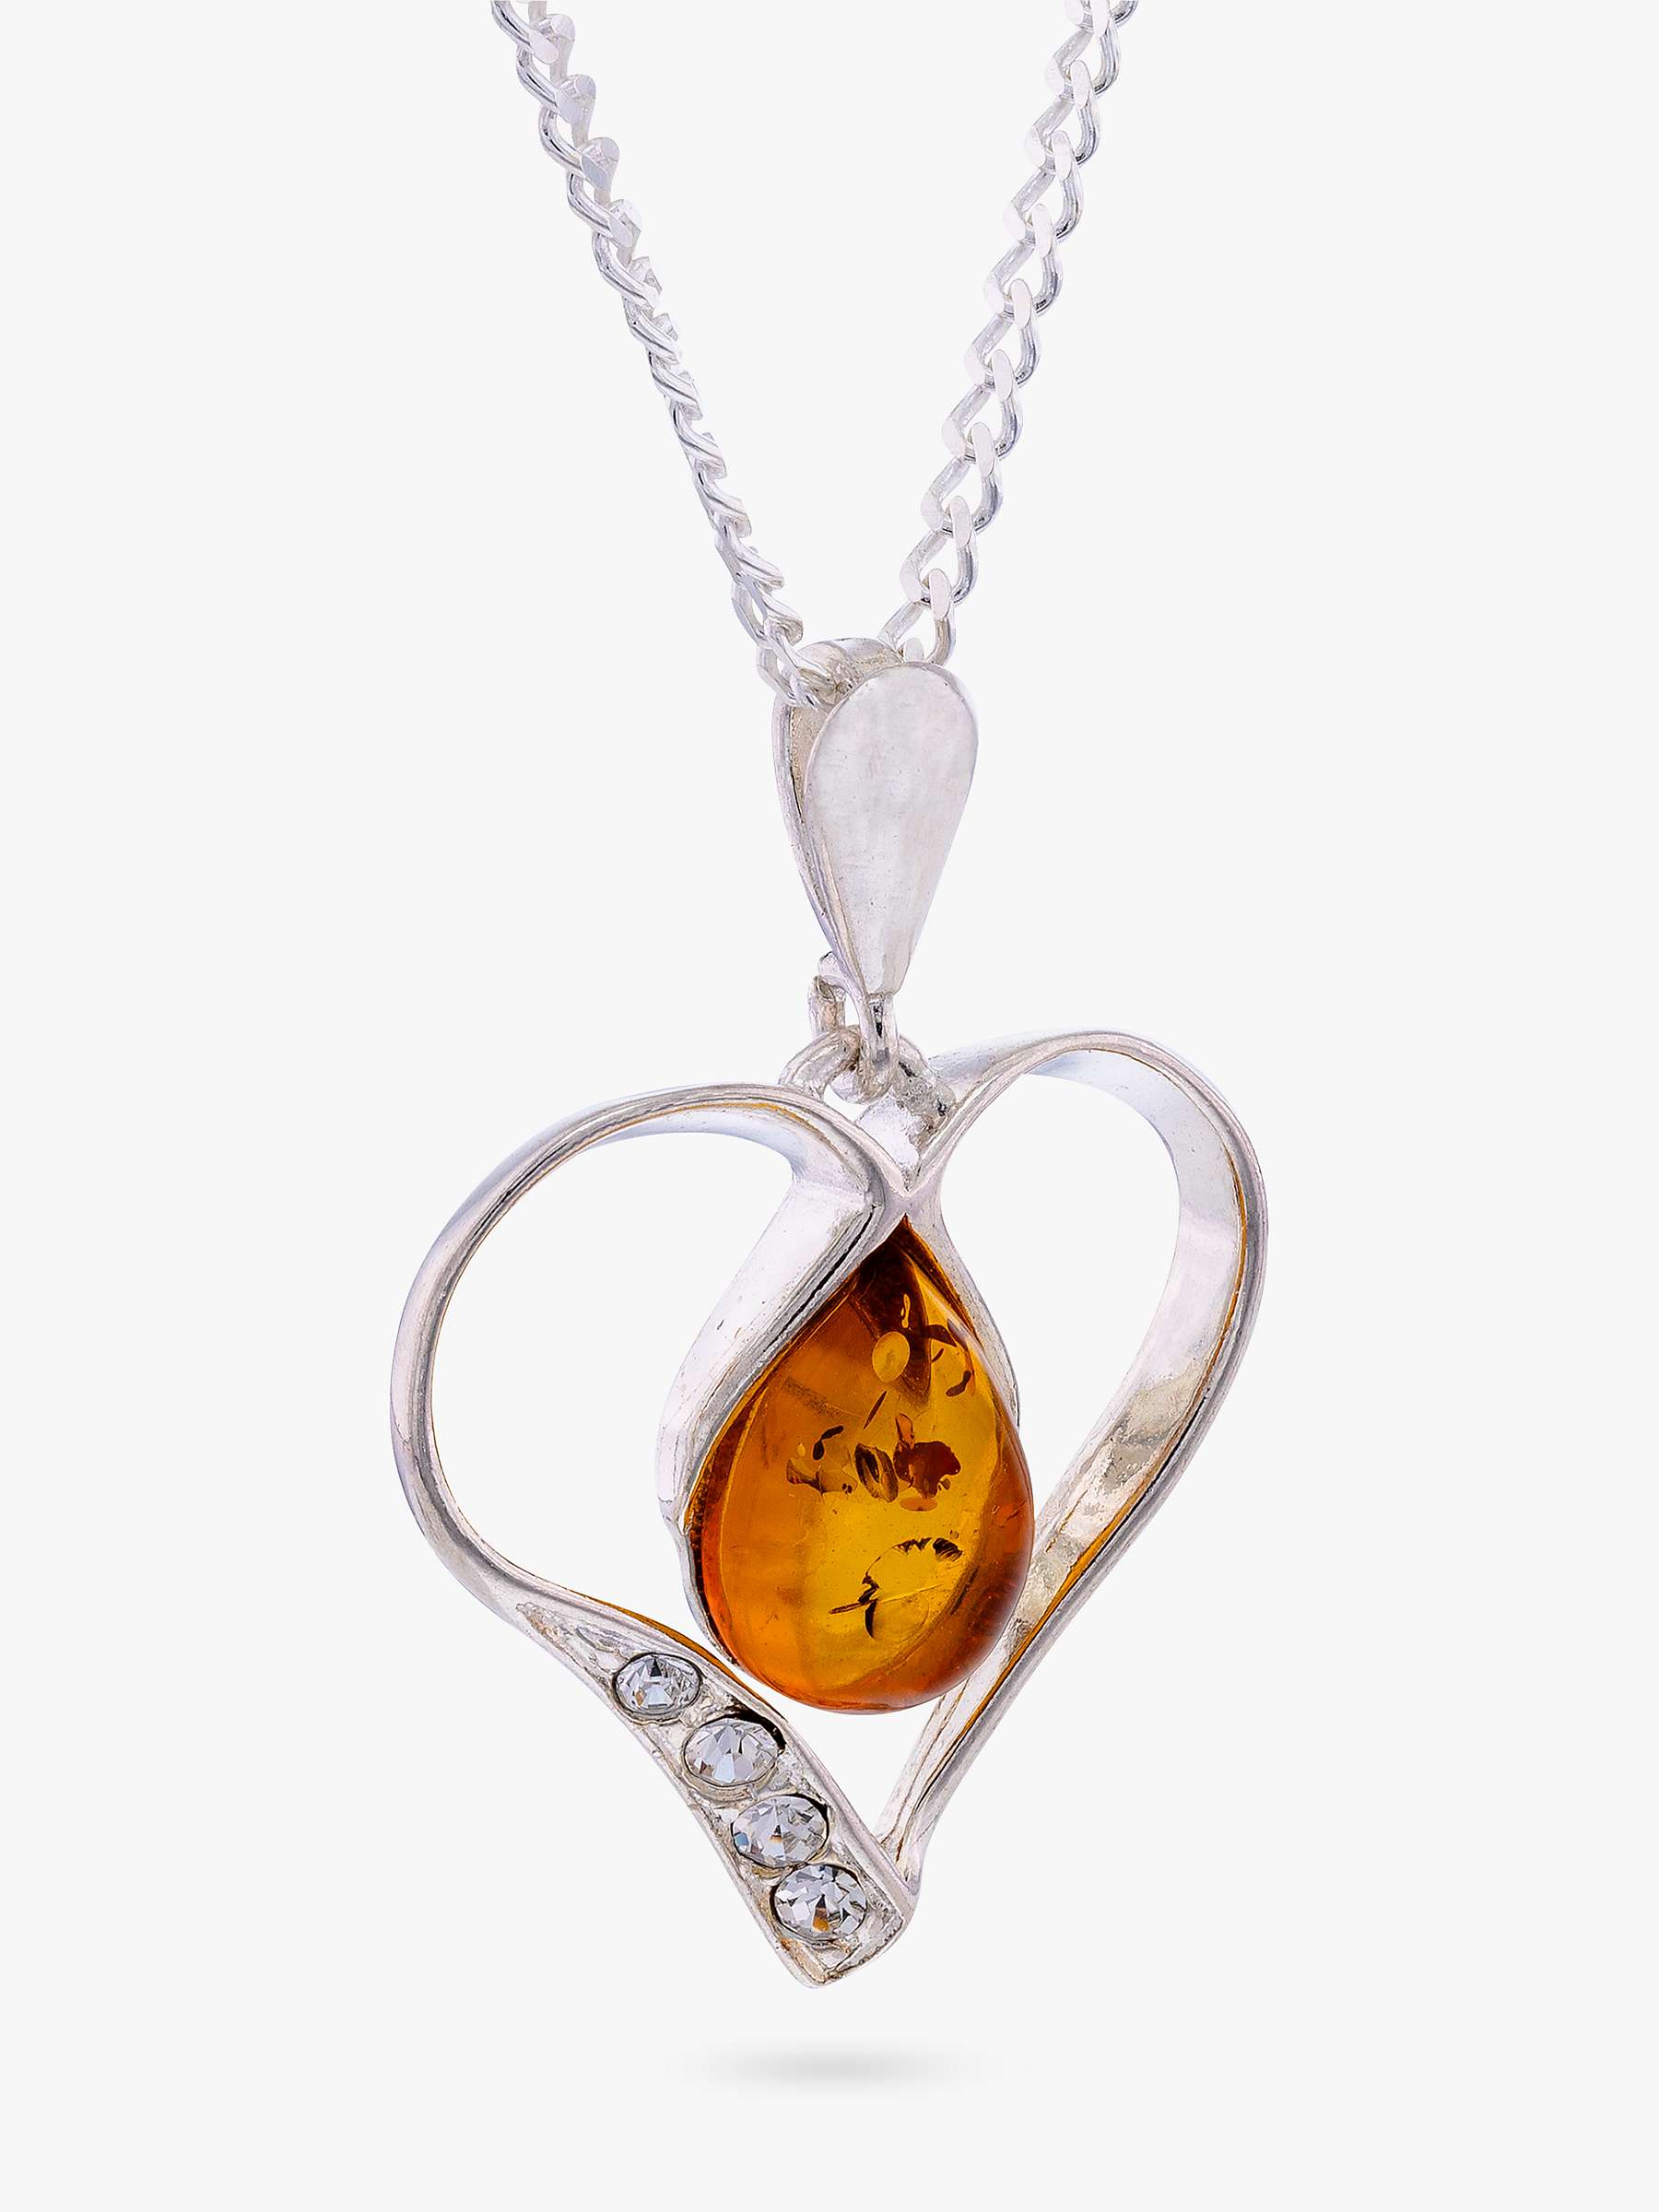 Buy Be-Jewelled Amber Cutout Heart Pendant Necklace, Silver/Cognac Online at johnlewis.com